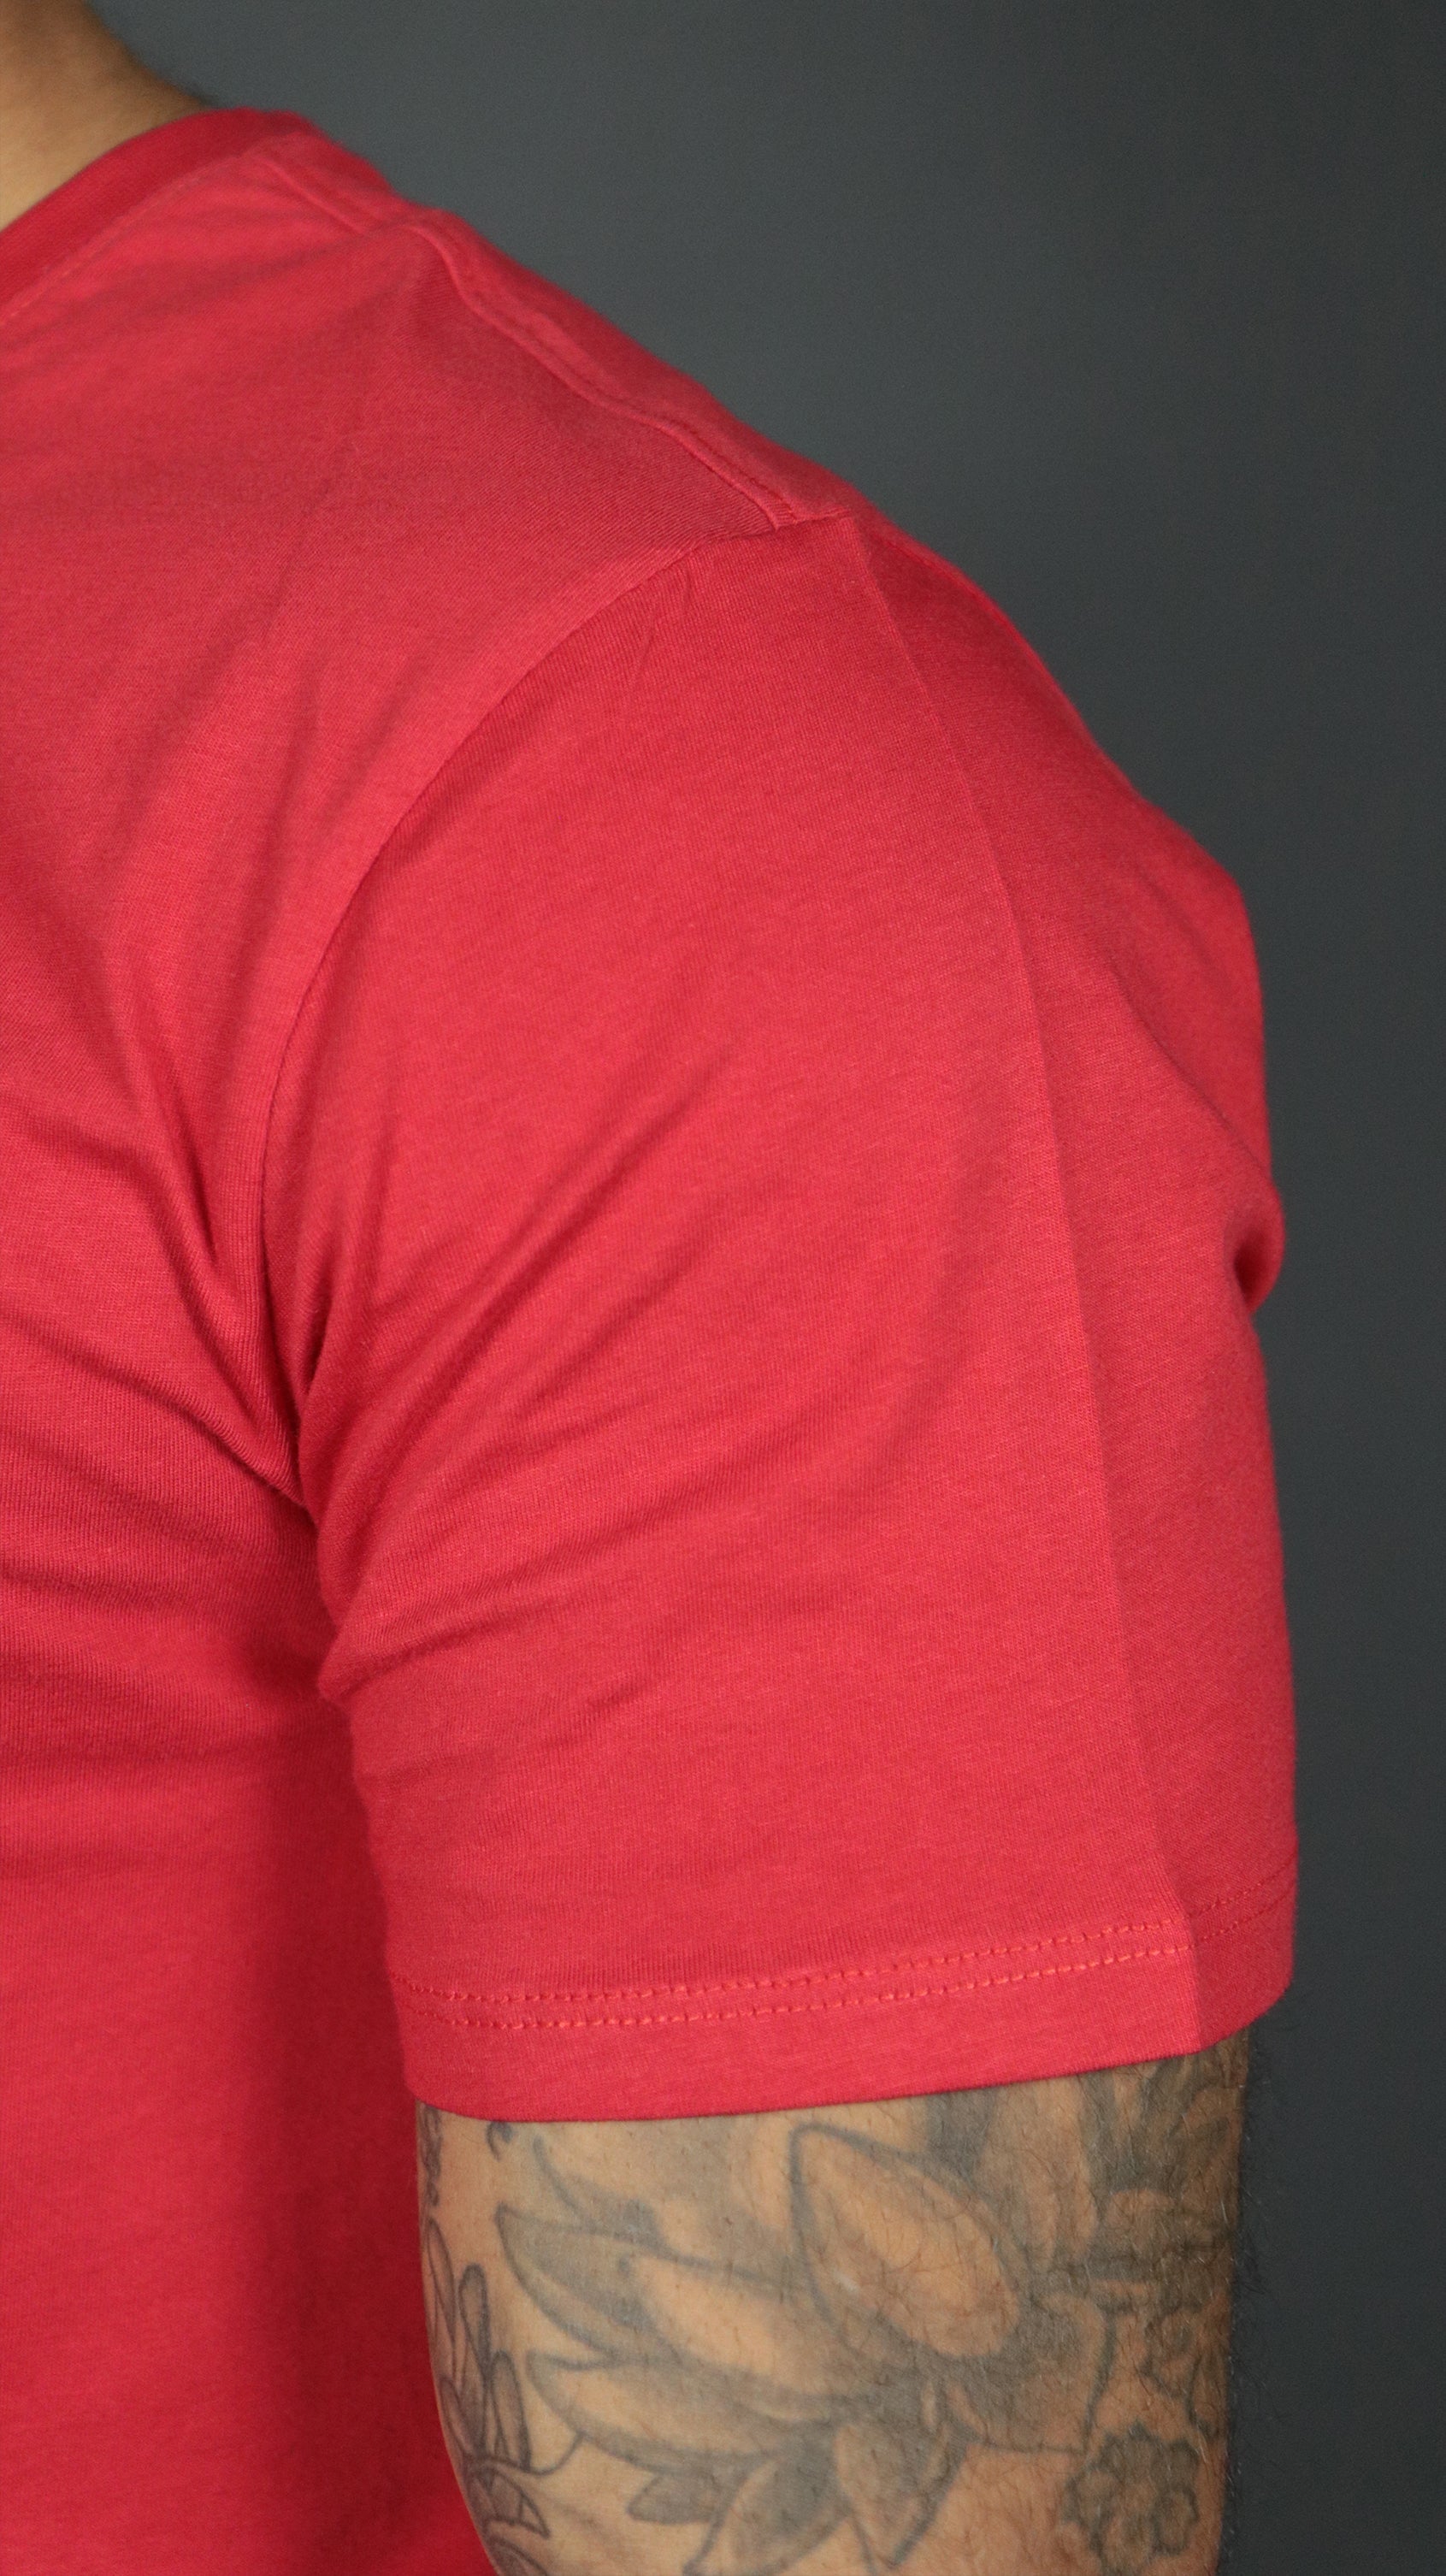 The fitting of the red drop cut t-shirt for men on the left shoulder.